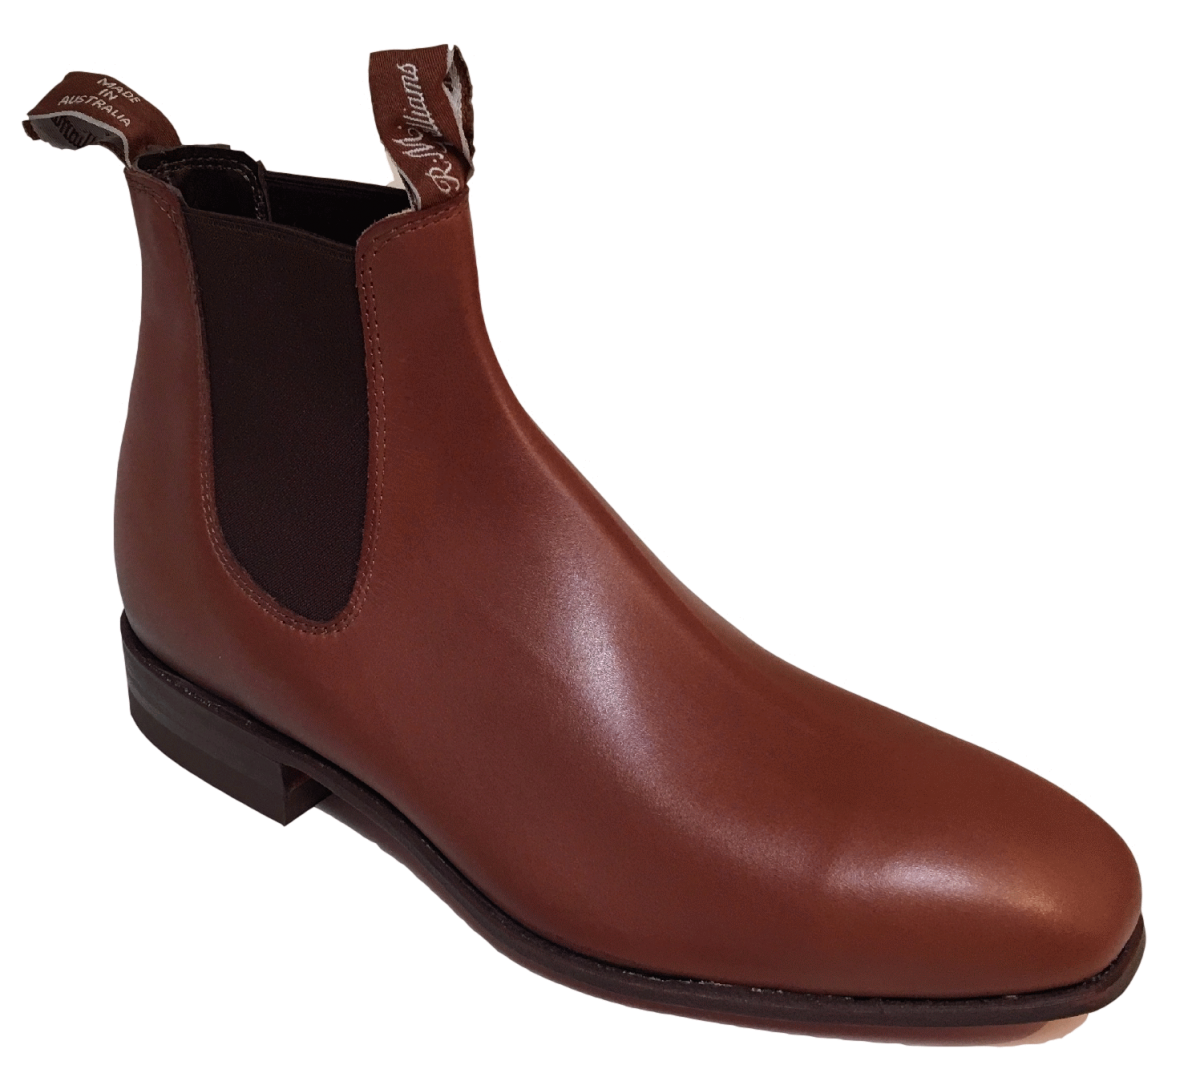 Boots Online. Craftsman with Screwed Leather Sole for a Finer Profile ...